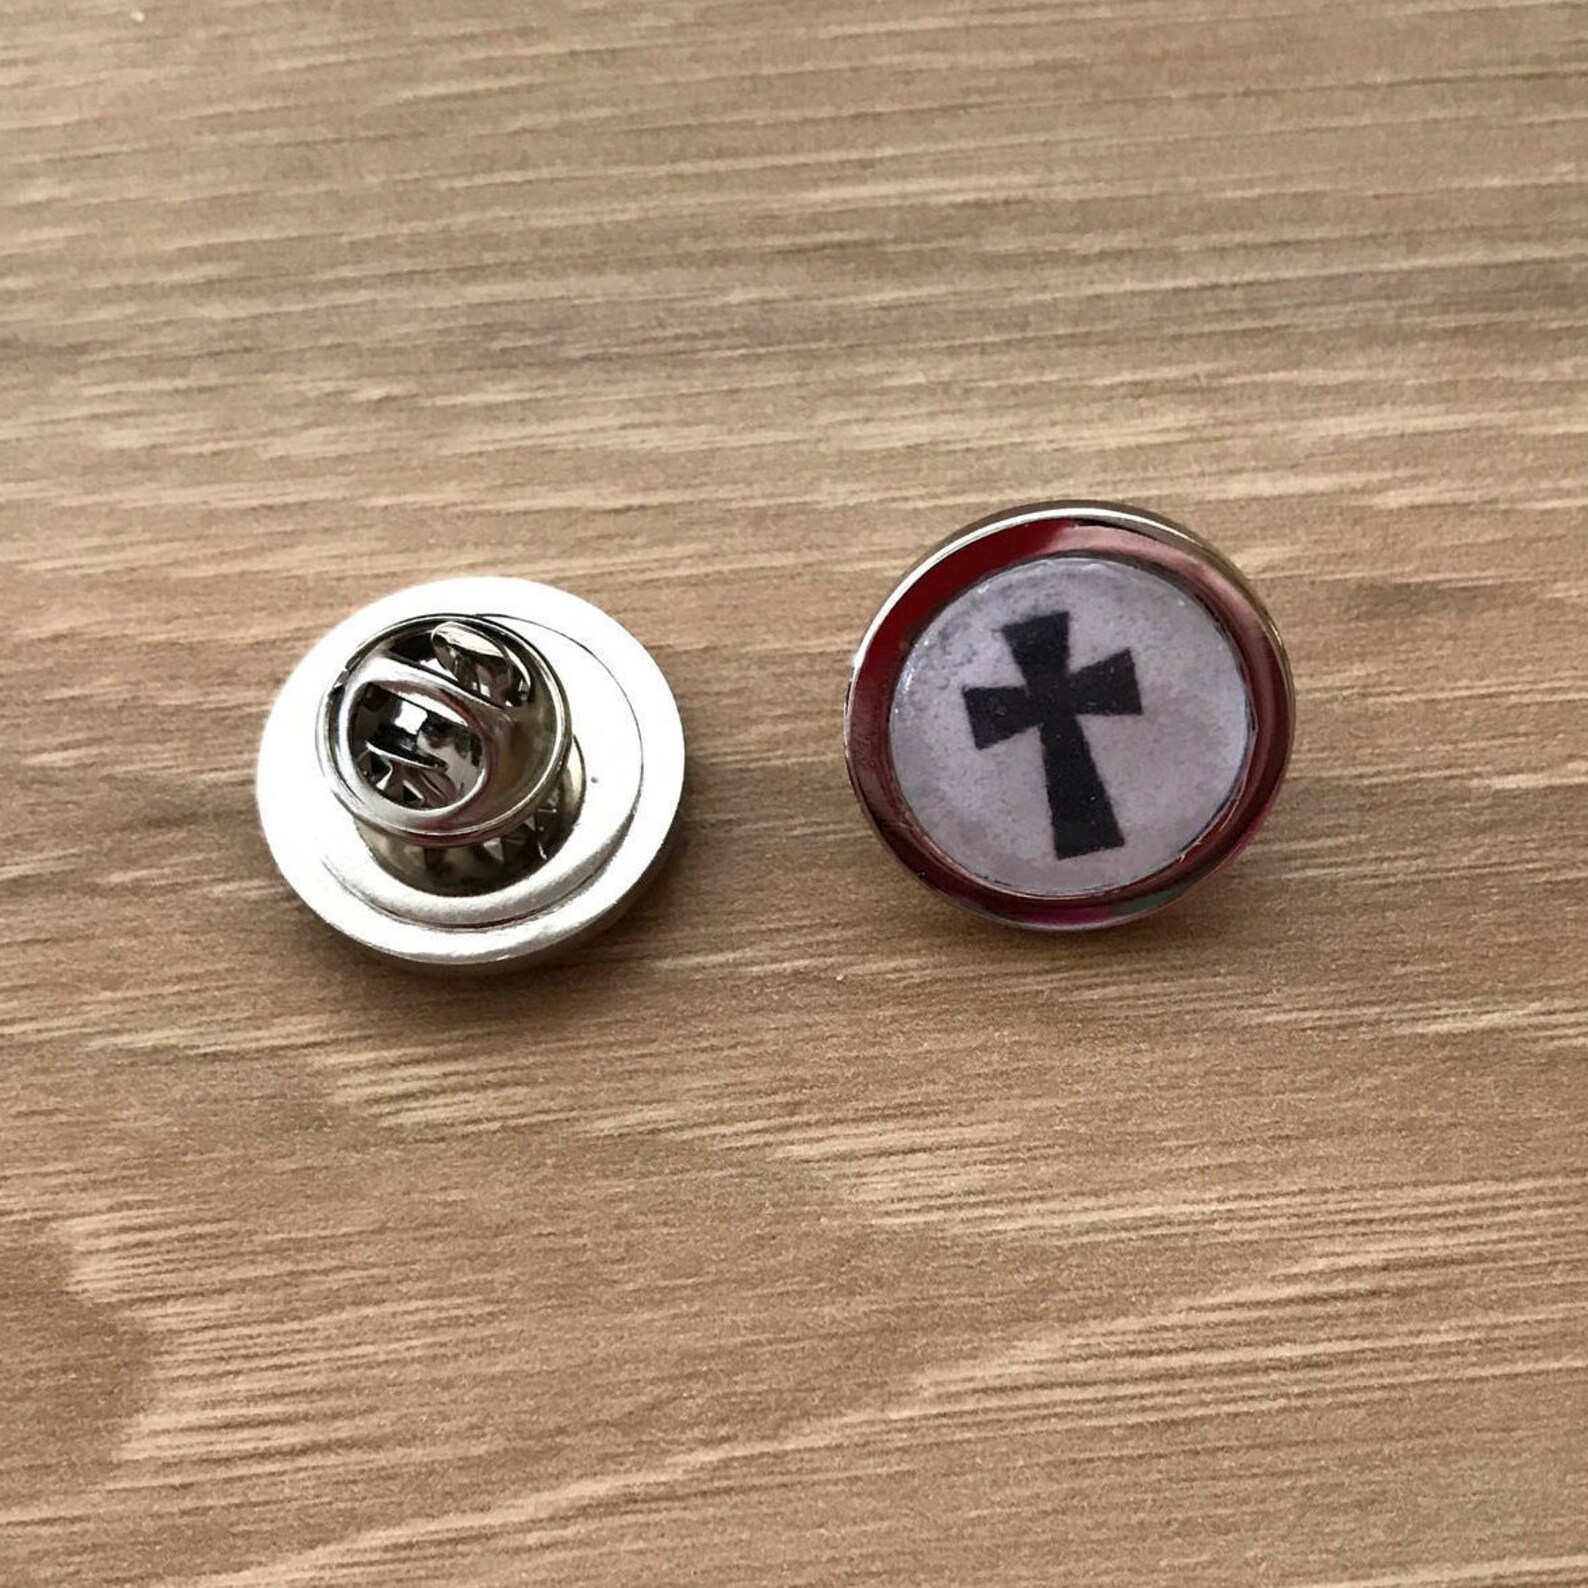 Christian Tie Tack Pin Religious Tie Tack Clutch Back Etsy